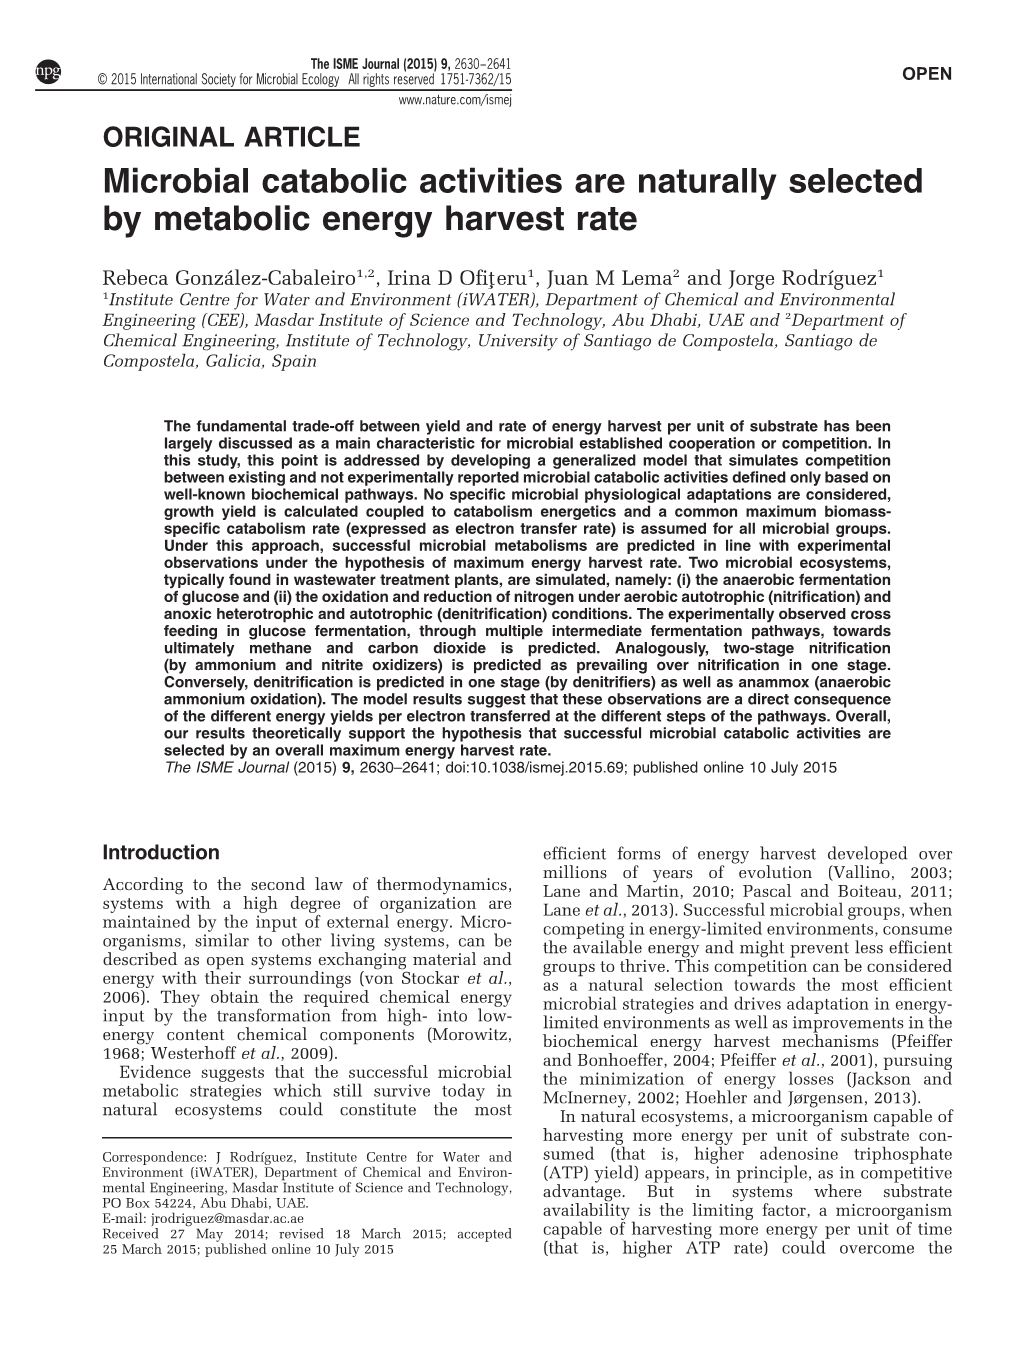 Microbial Catabolic Activities Are Naturally Selected by Metabolic Energy Harvest Rate